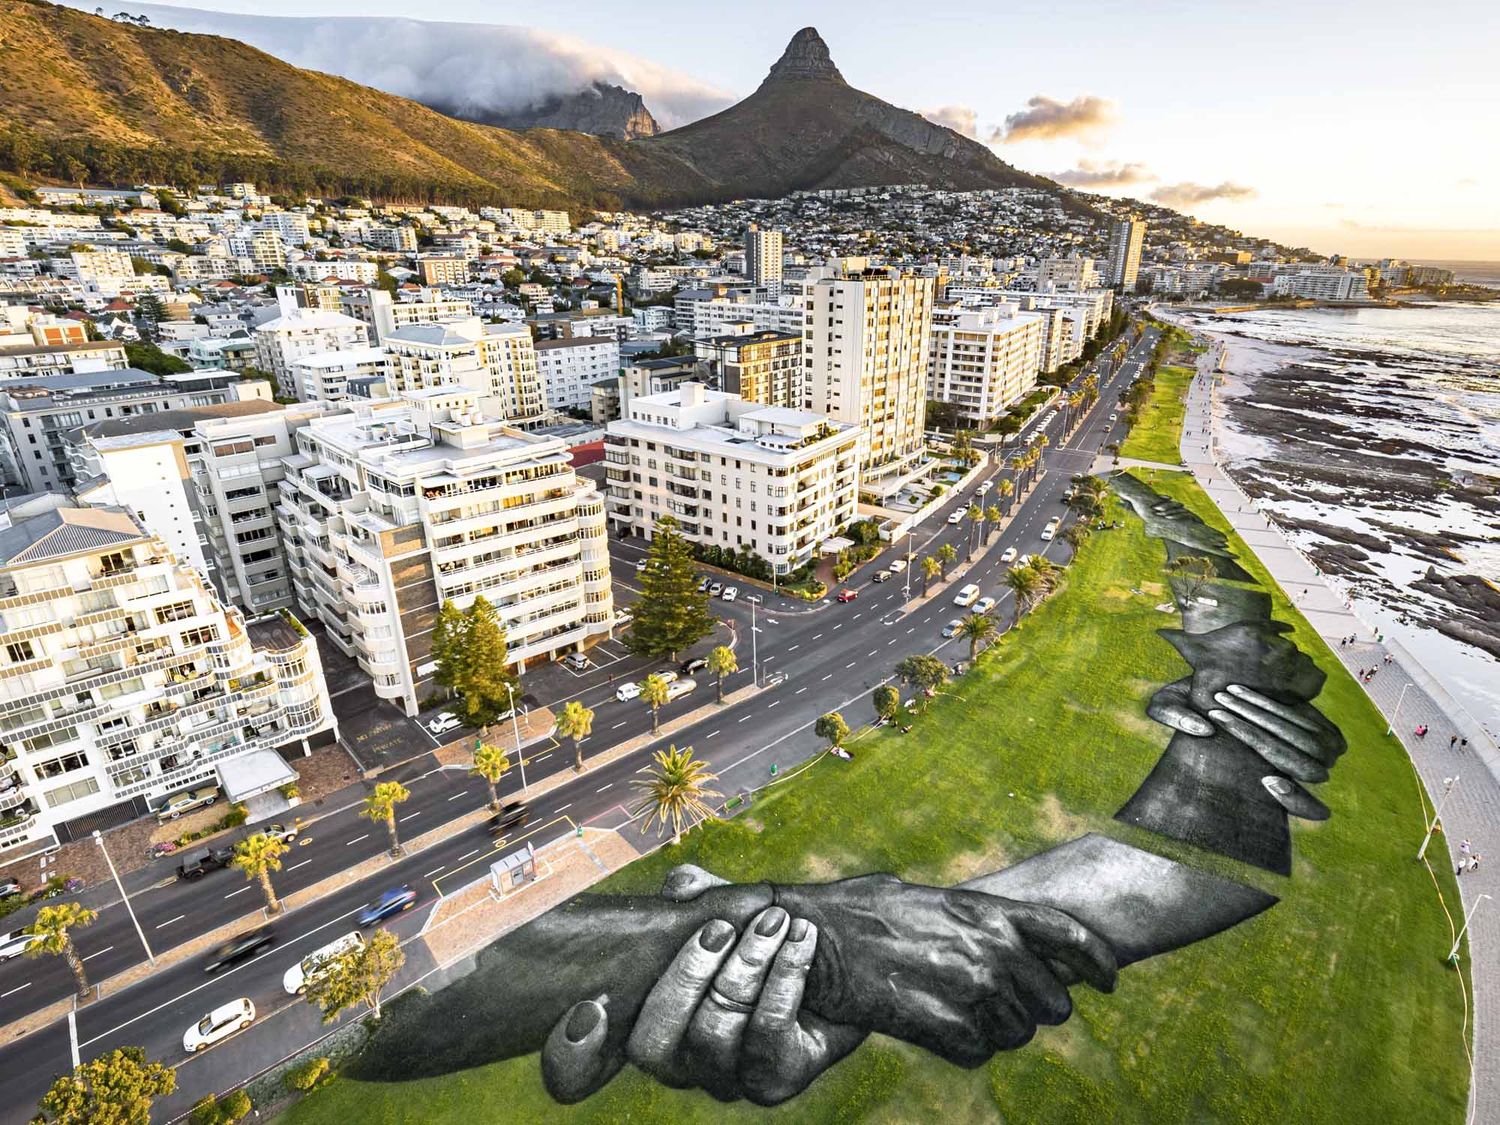 Largest street art festival hosted annually, the IPAF is a blend of street art murals, street tours, pop-ups which has placed Cape Town at the forefront of Street Art and culture on the African continent (@Saype).